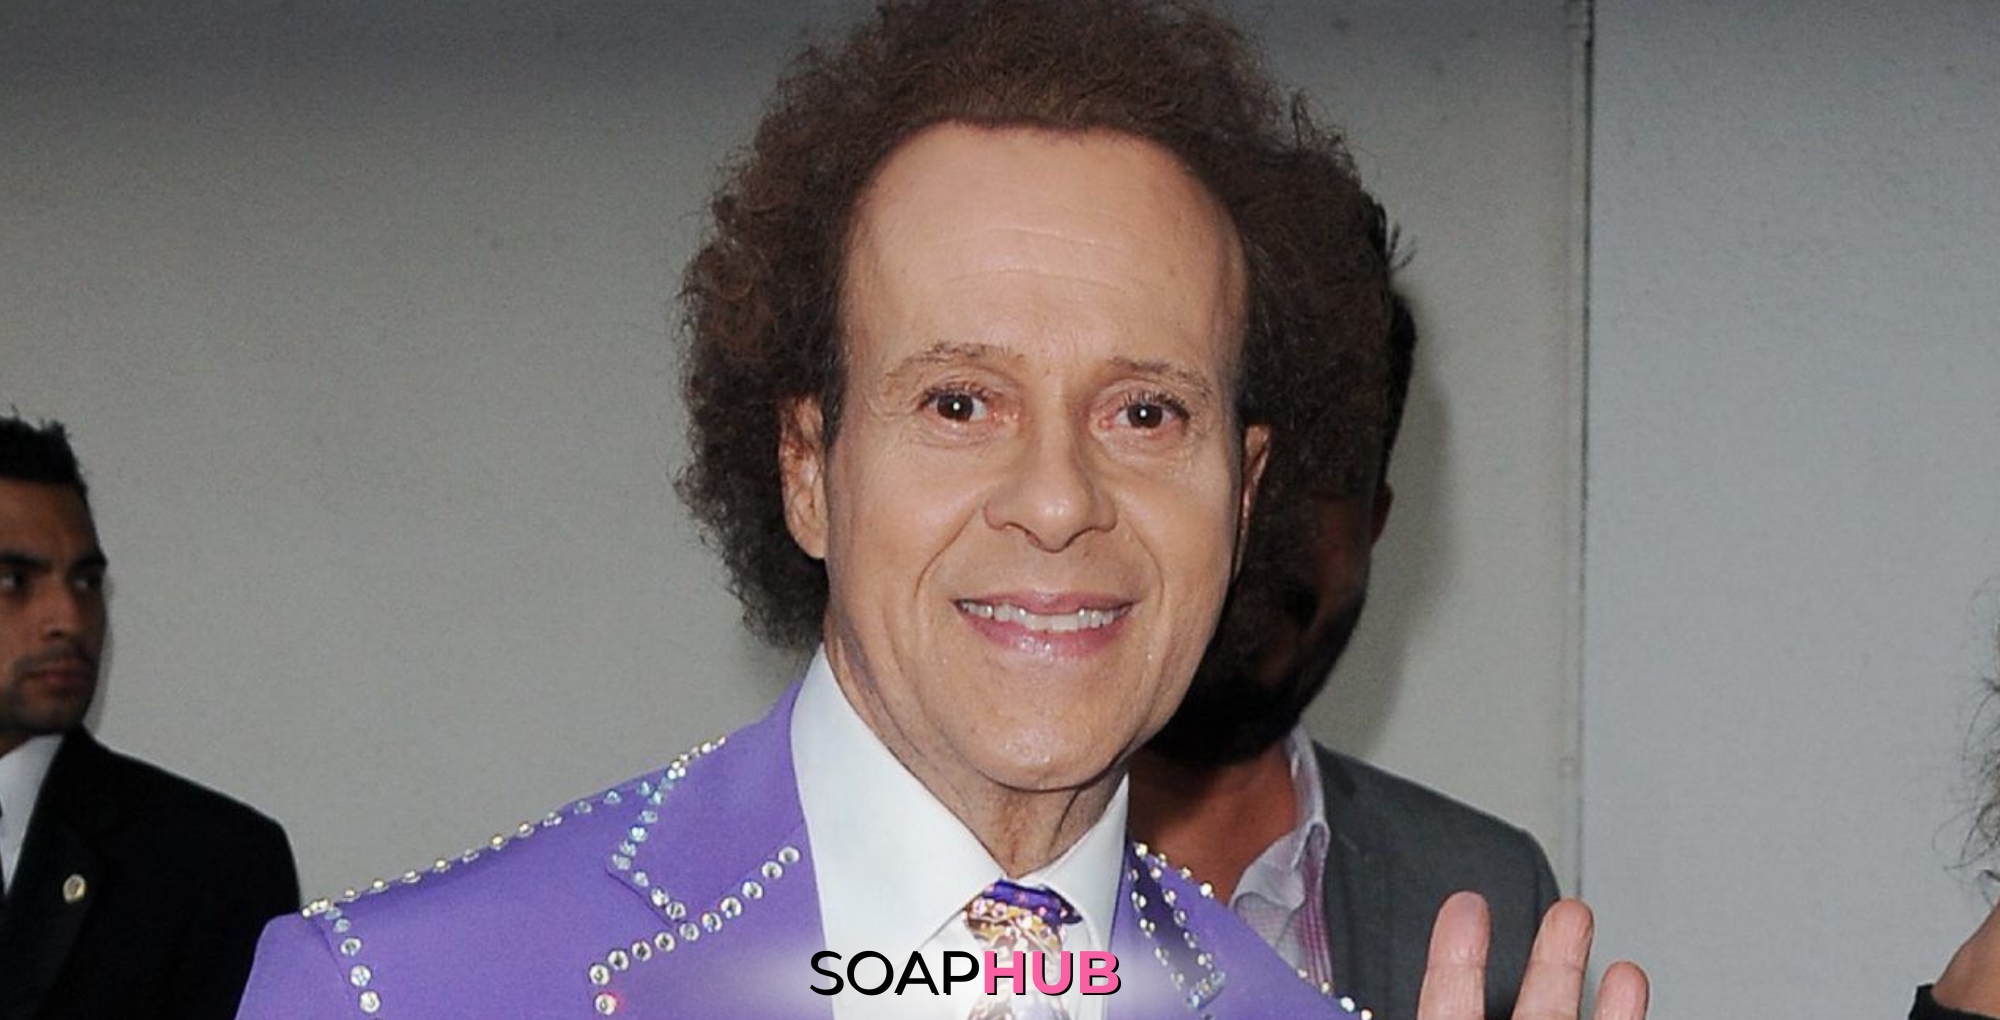 Richard Simmons battled cancer a while ago with the Soap Hub logo.